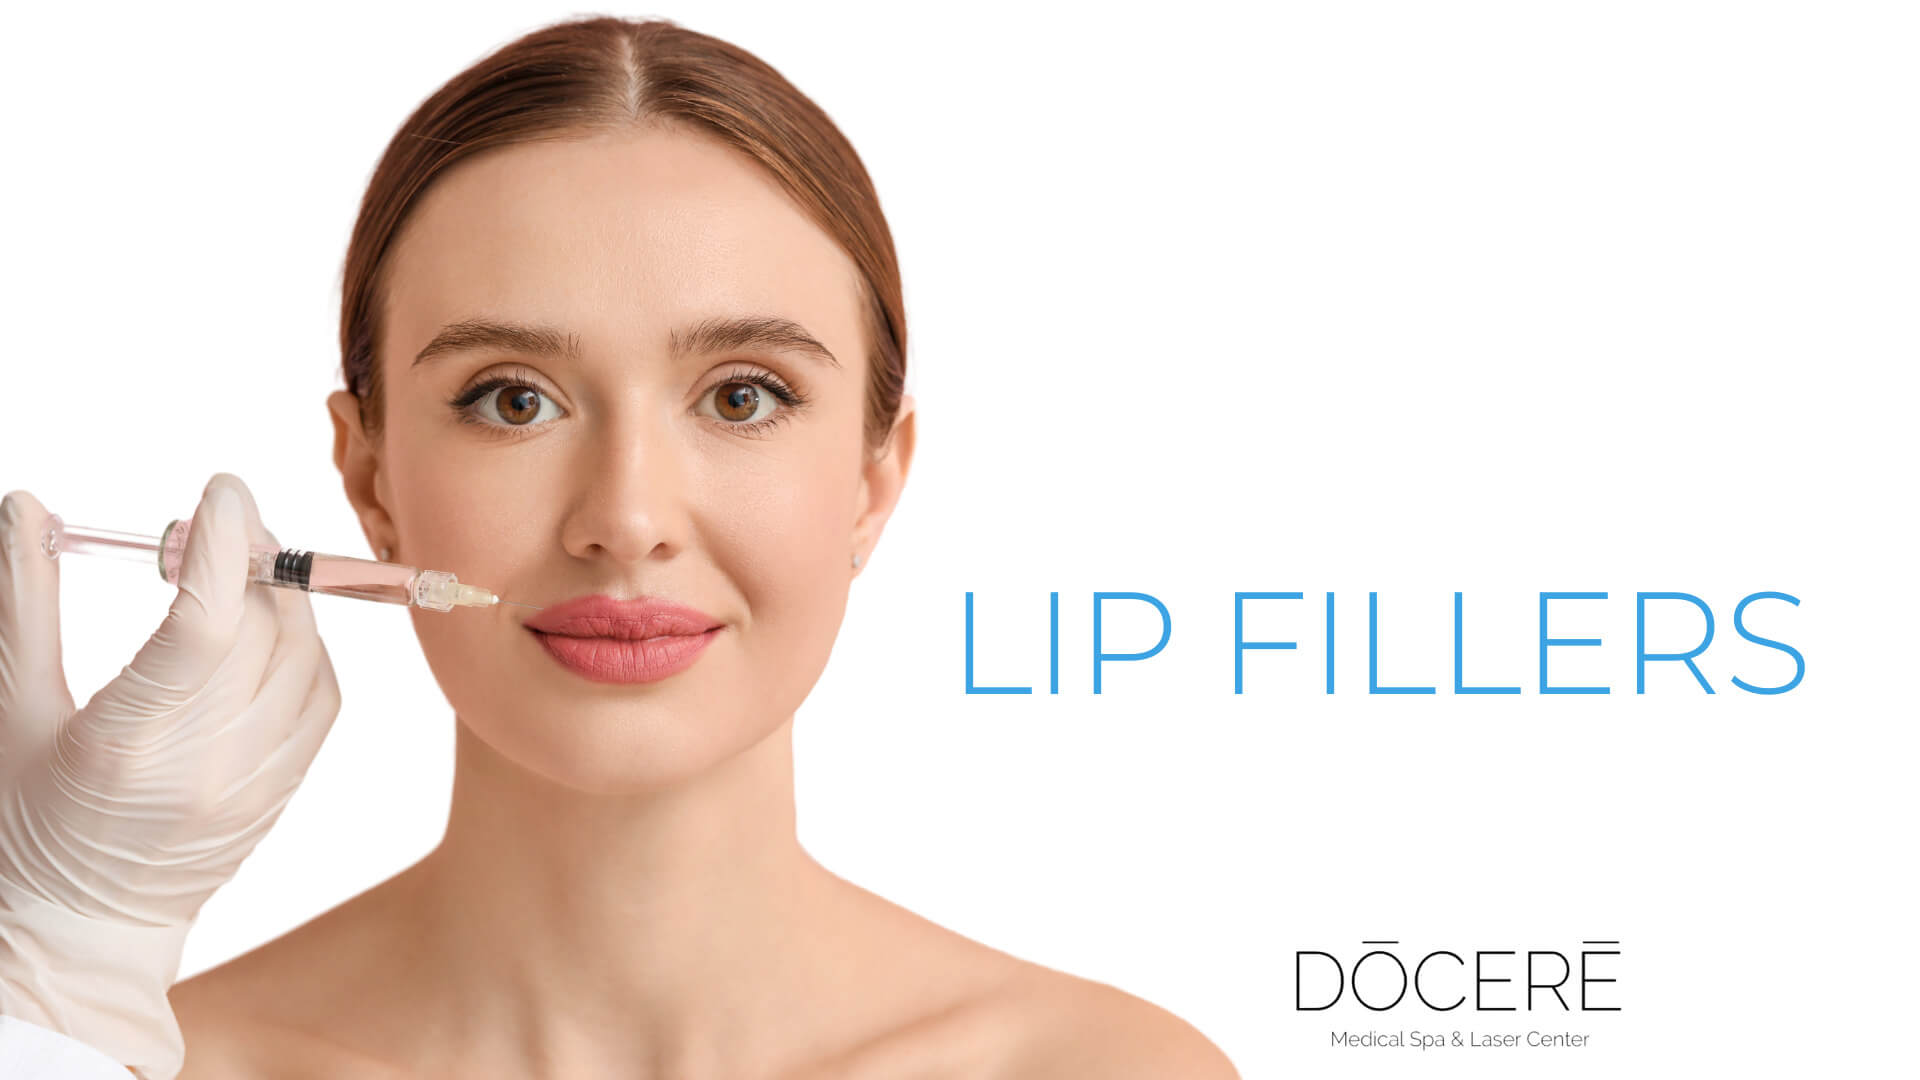 A beautiful woman receiving a lip filler injectable in Cleveland, Ohio